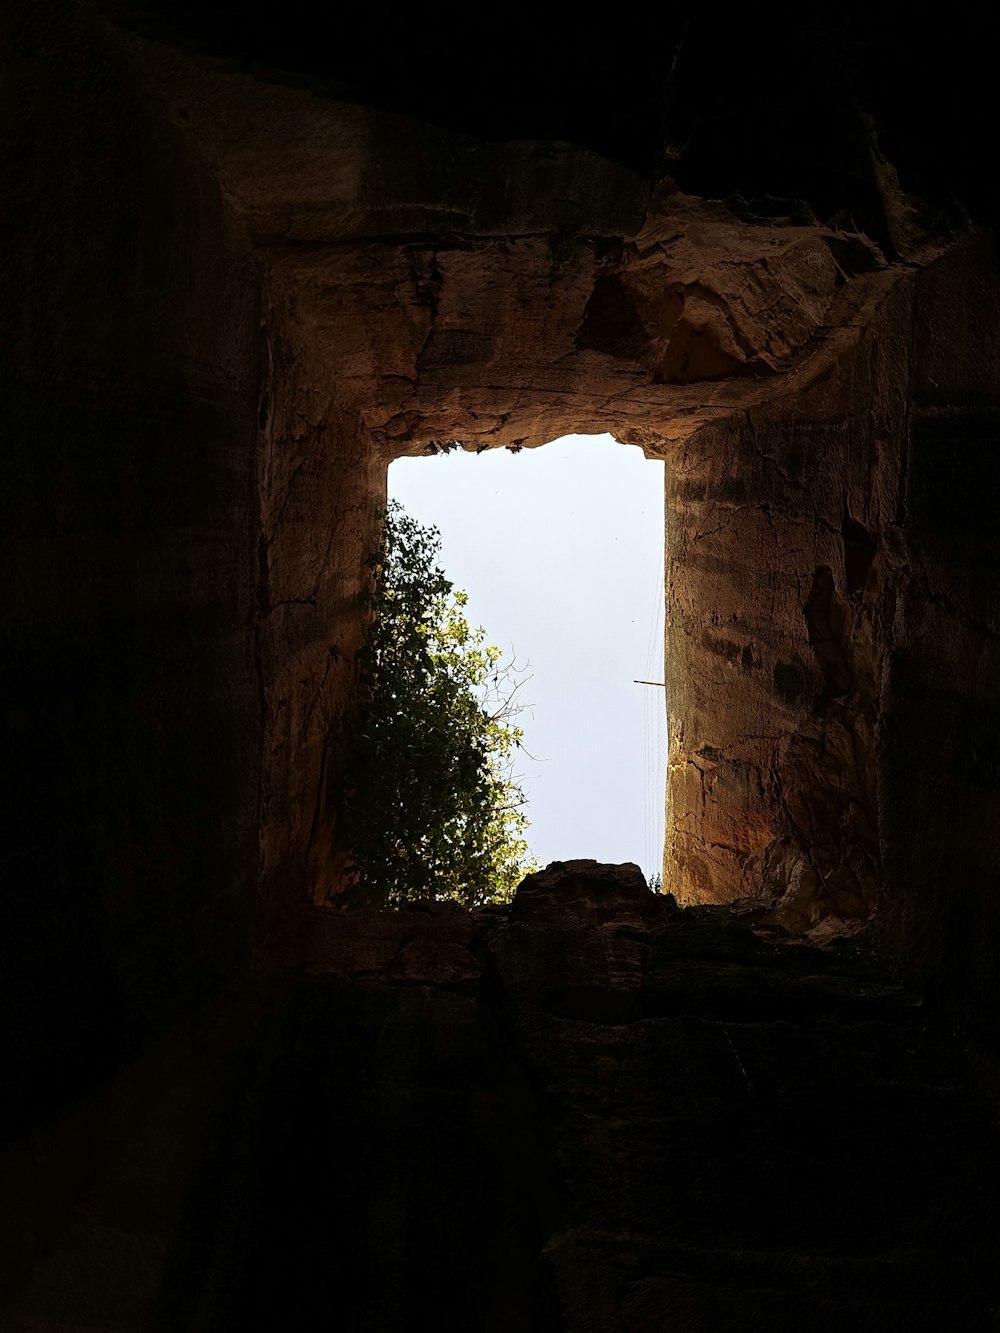 a view of a tree through a window in a cave